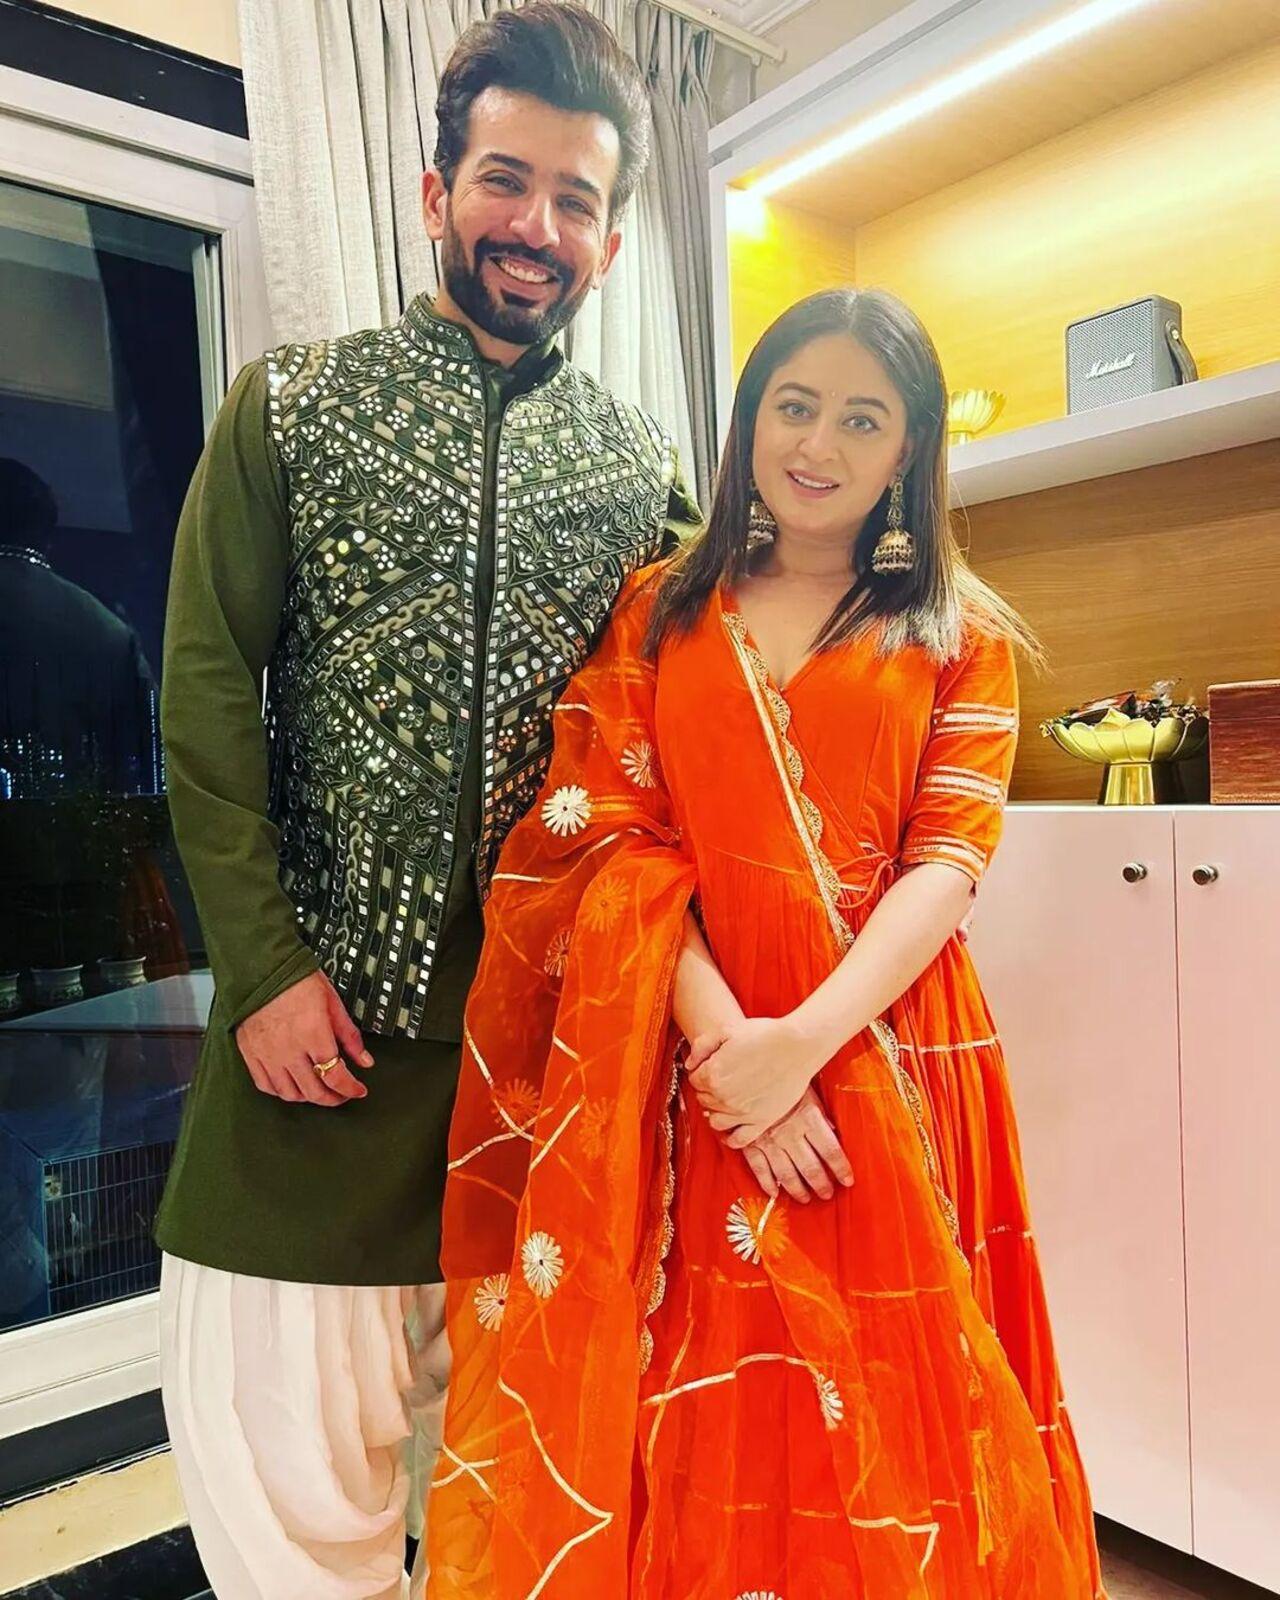 Jay Bhanushali and Mahhi Vij got married in November 2011 and have since been sharing their love and bond with their fans through social media platforms